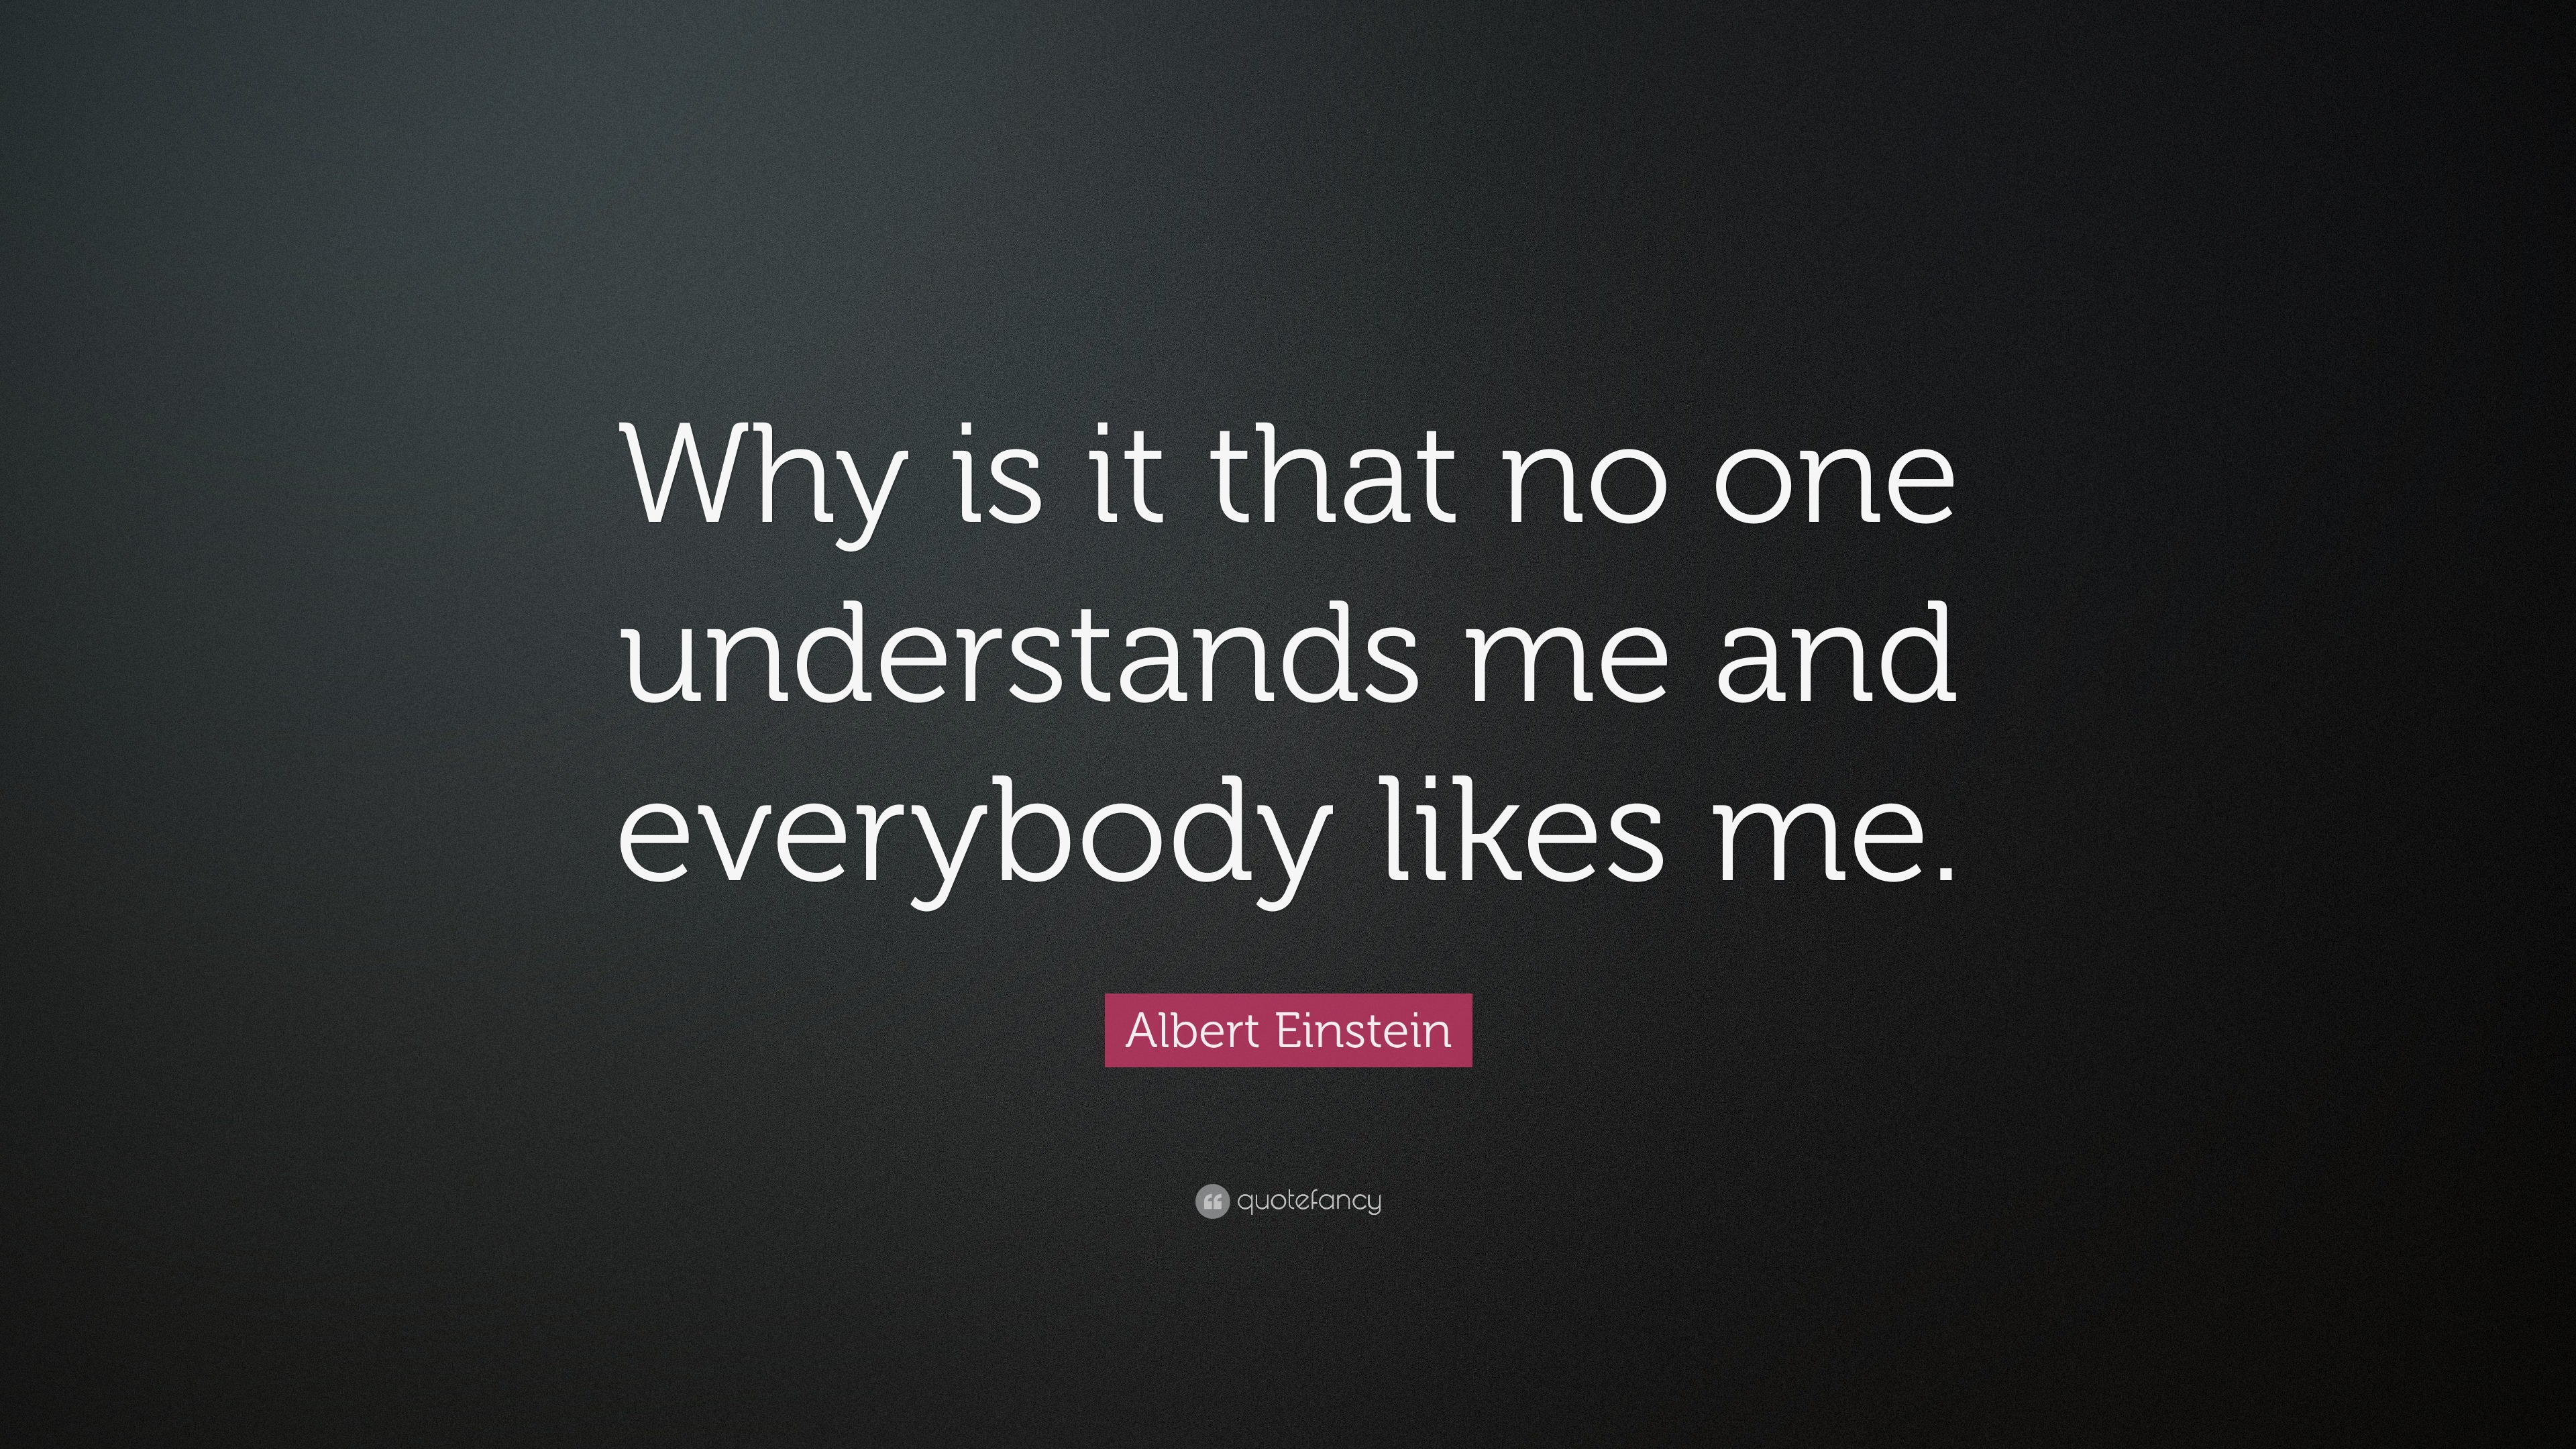 Albert Einstein Quote: “Why Is It That No One Understands Me And Everybody Likes Me.”